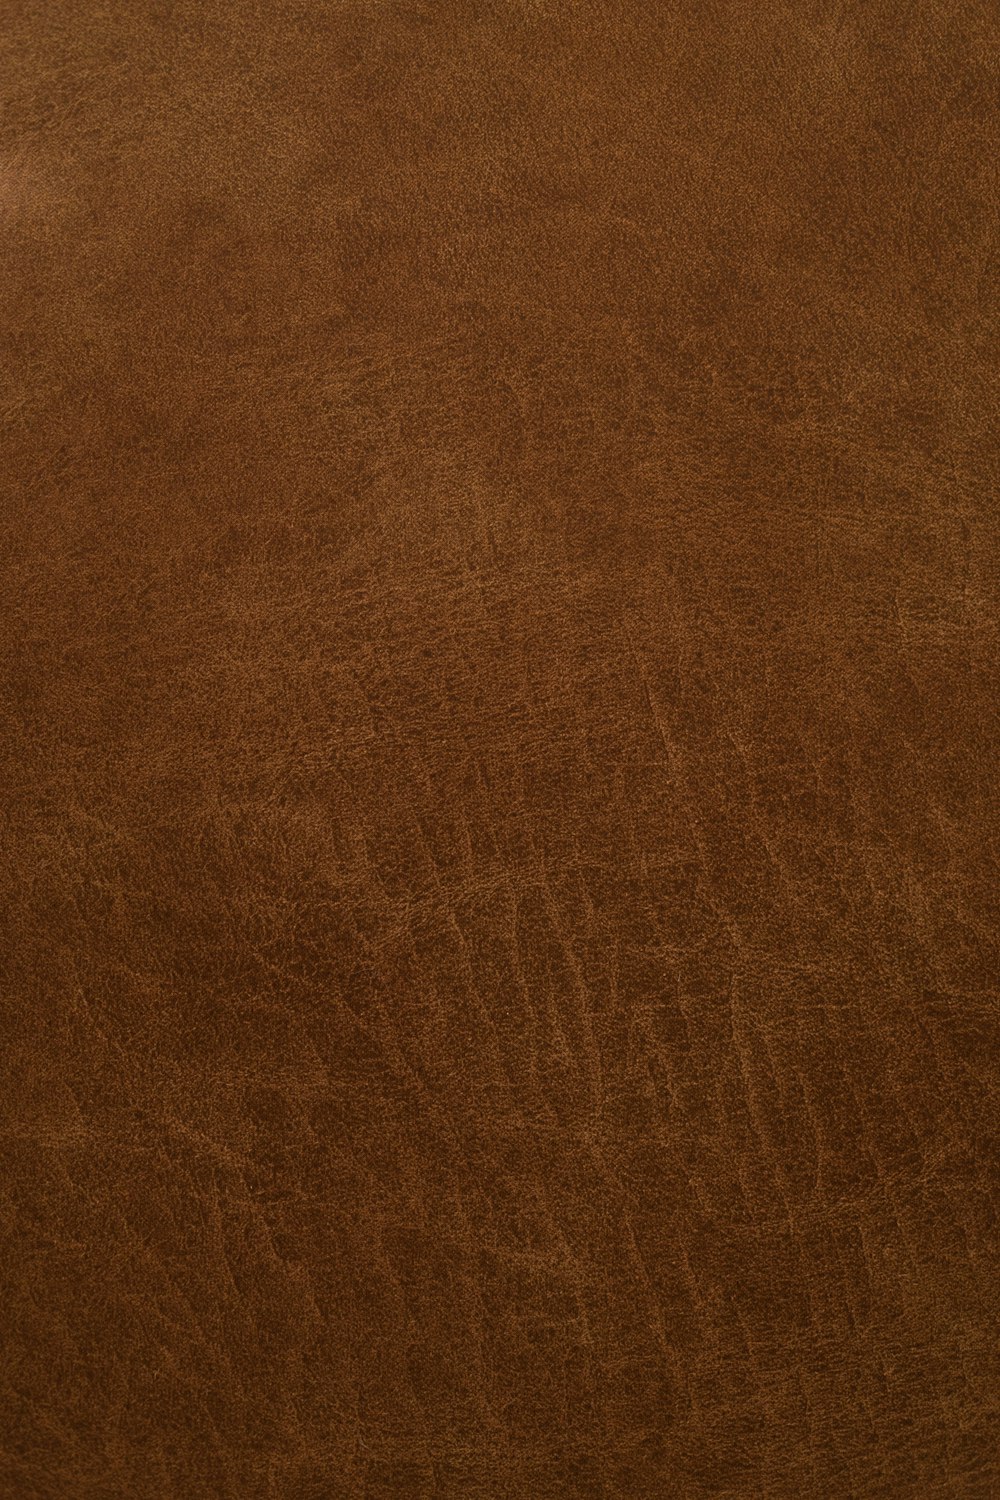 Brown Wallpaper Pictures | Download Free Images on Unsplash